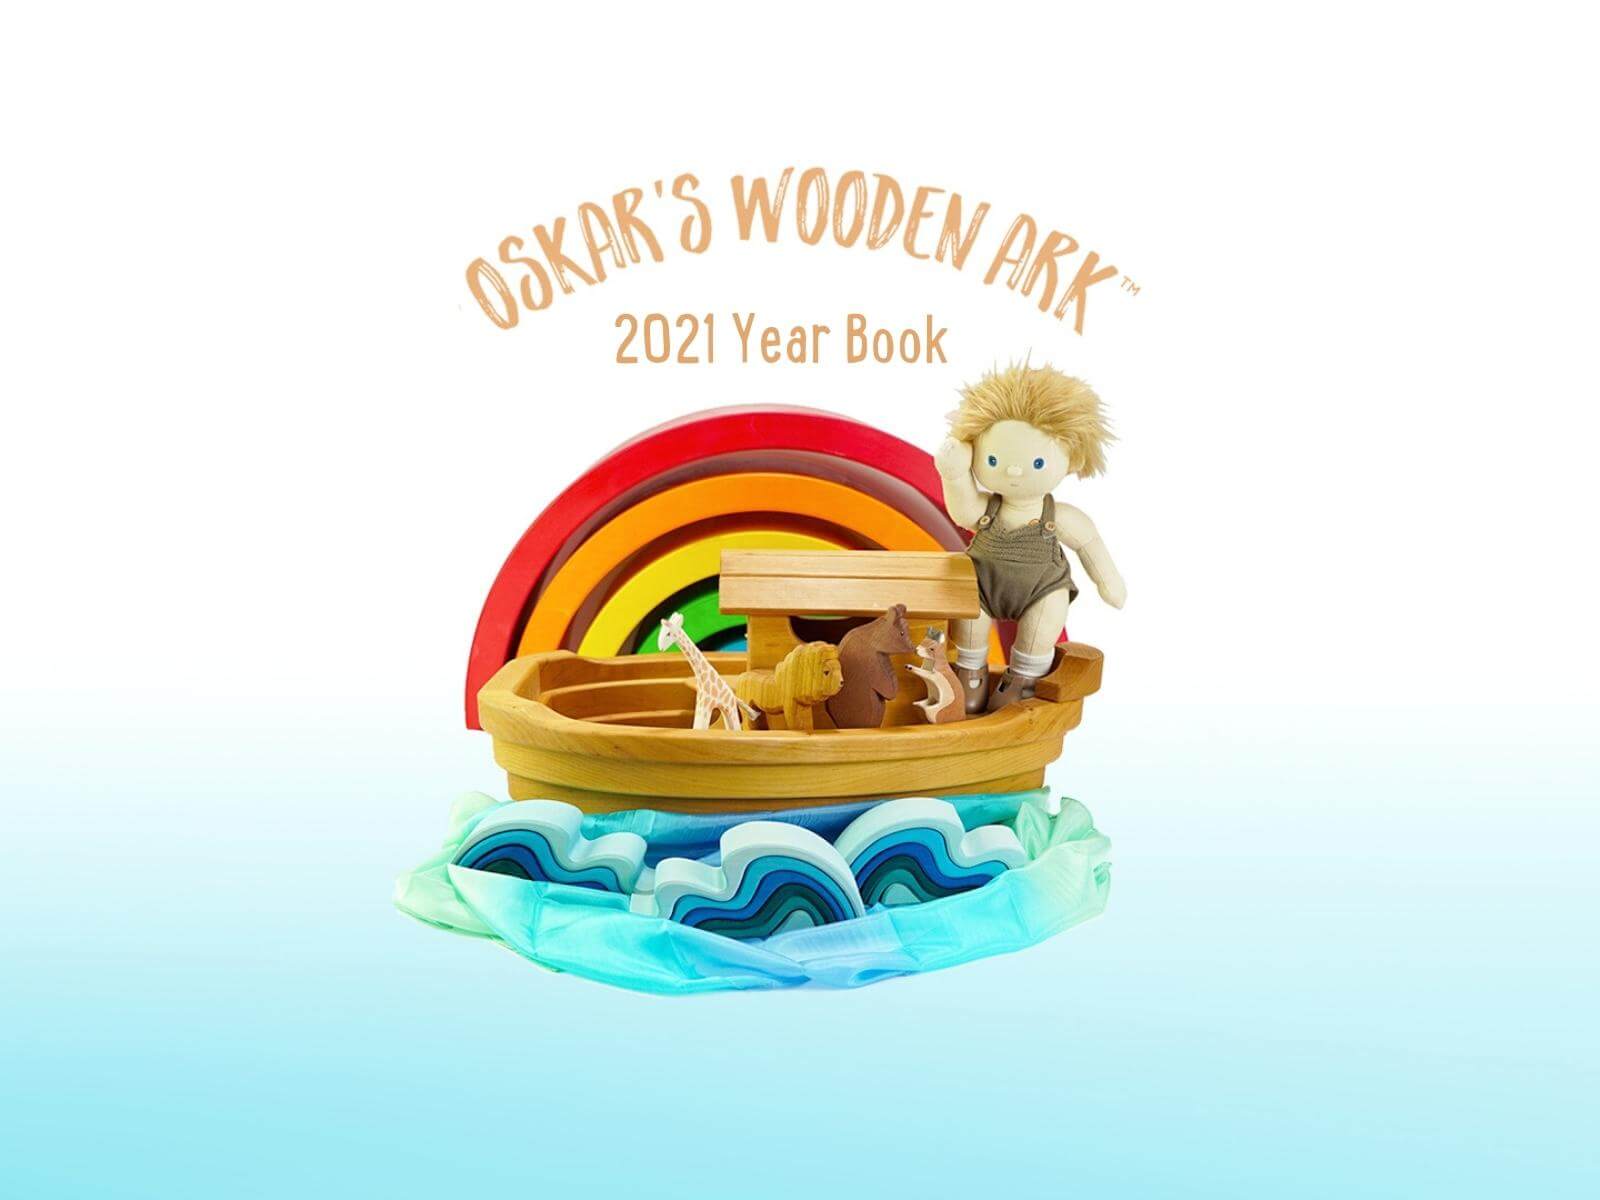 The Oskar's Wooden Ark 2021 Yearbook: Looking Back and Looking Forward